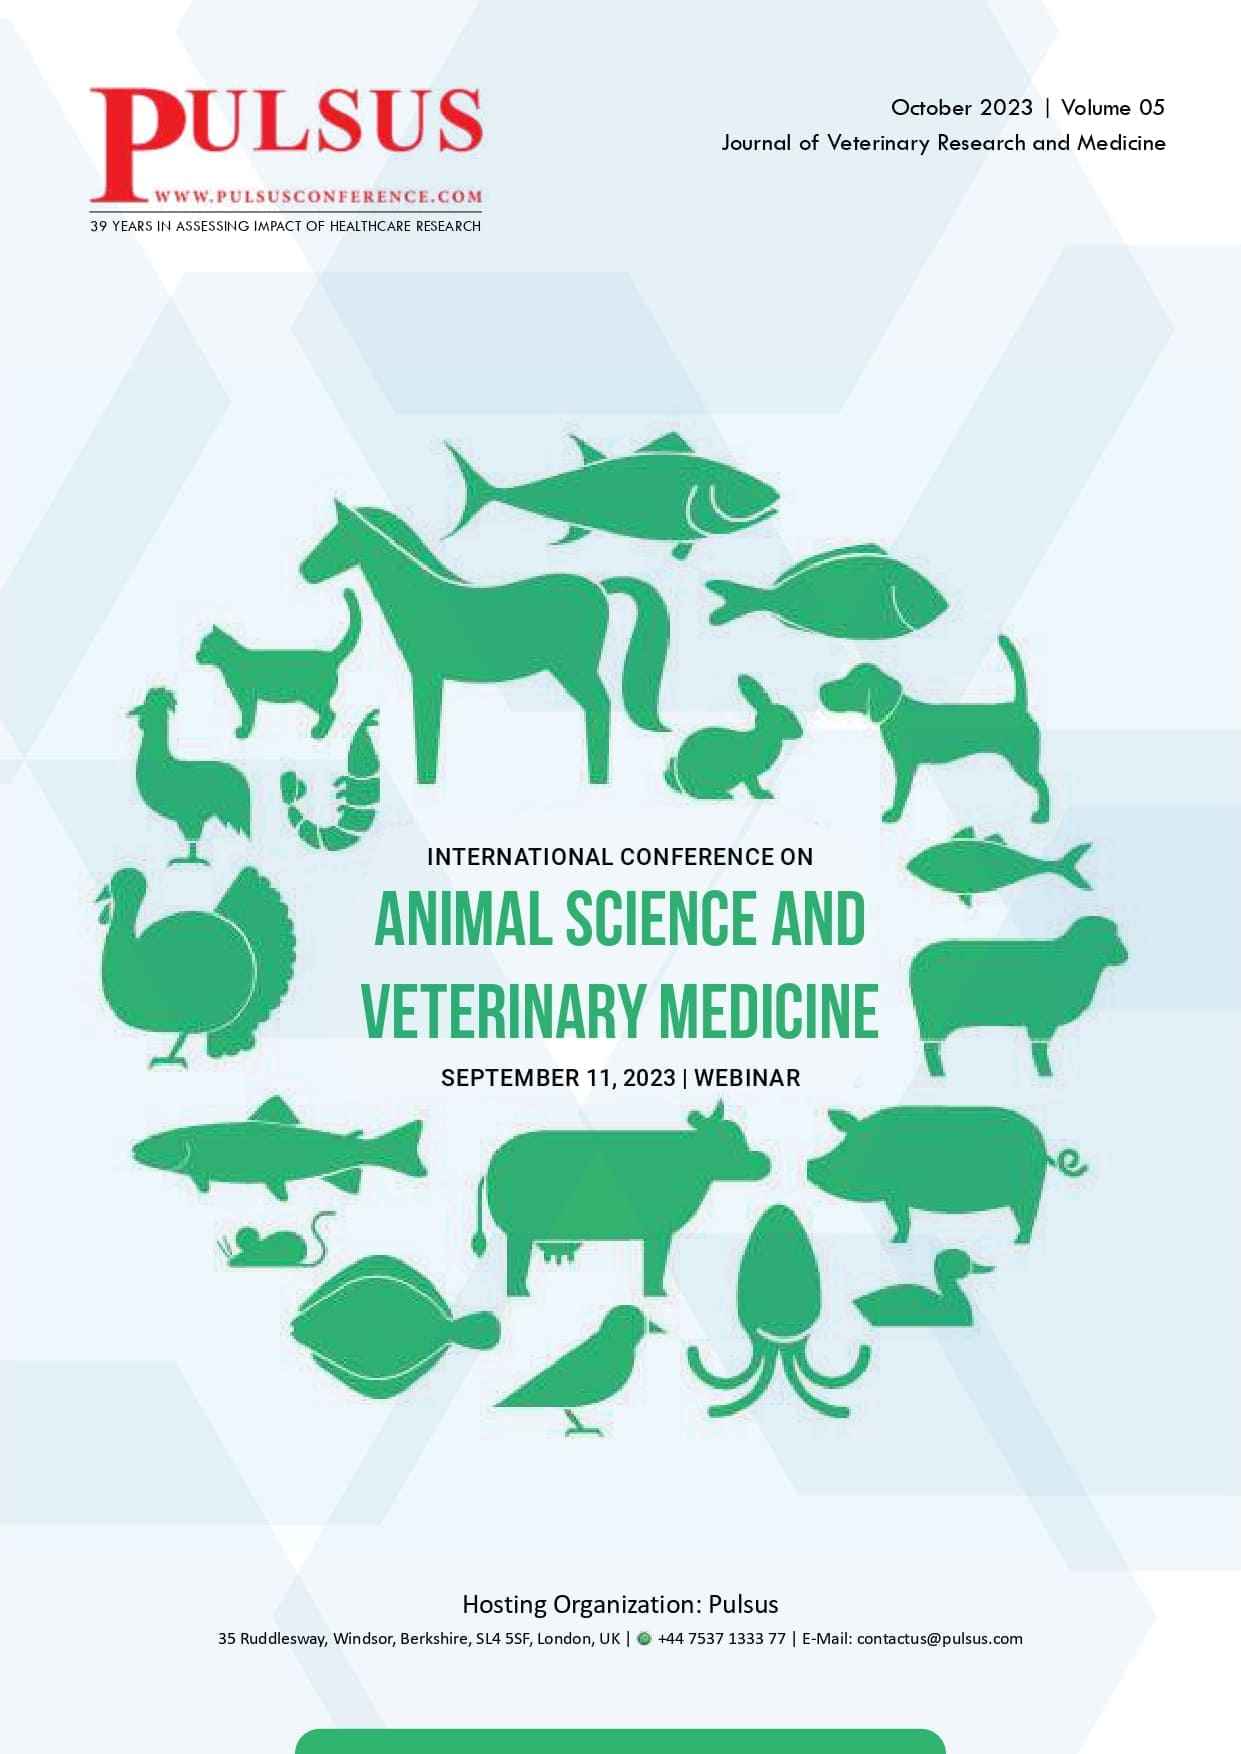 https://www.pulsus.com/conference-abstracts/animal-science-2023-proceedings.html